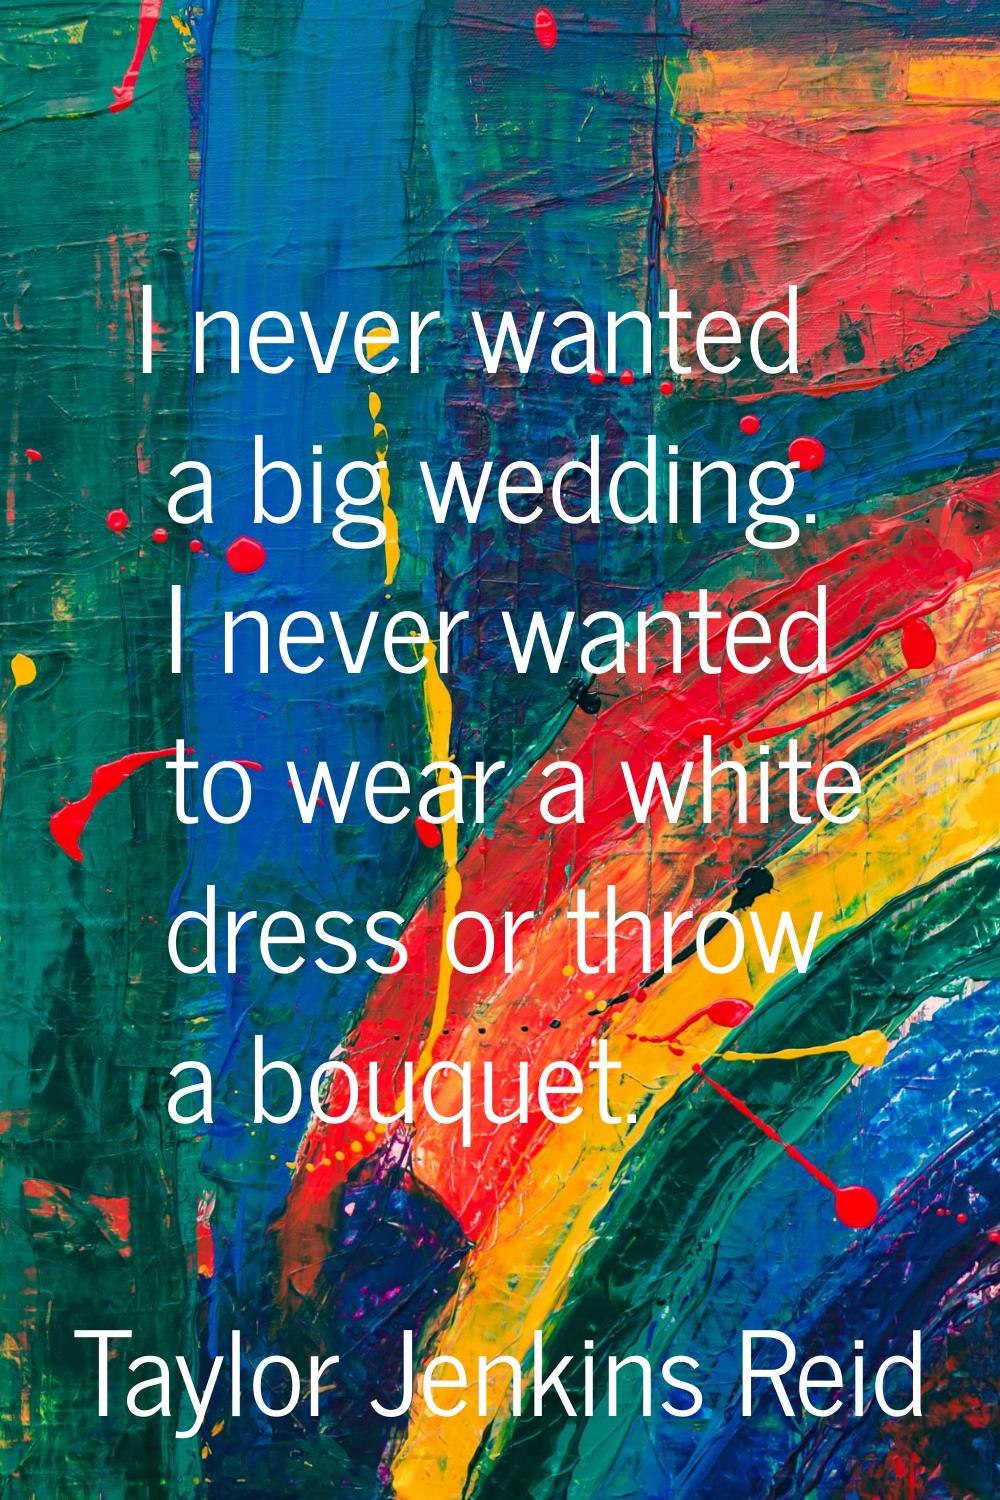 I never wanted a big wedding. I never wanted to wear a white dress or throw a bouquet.